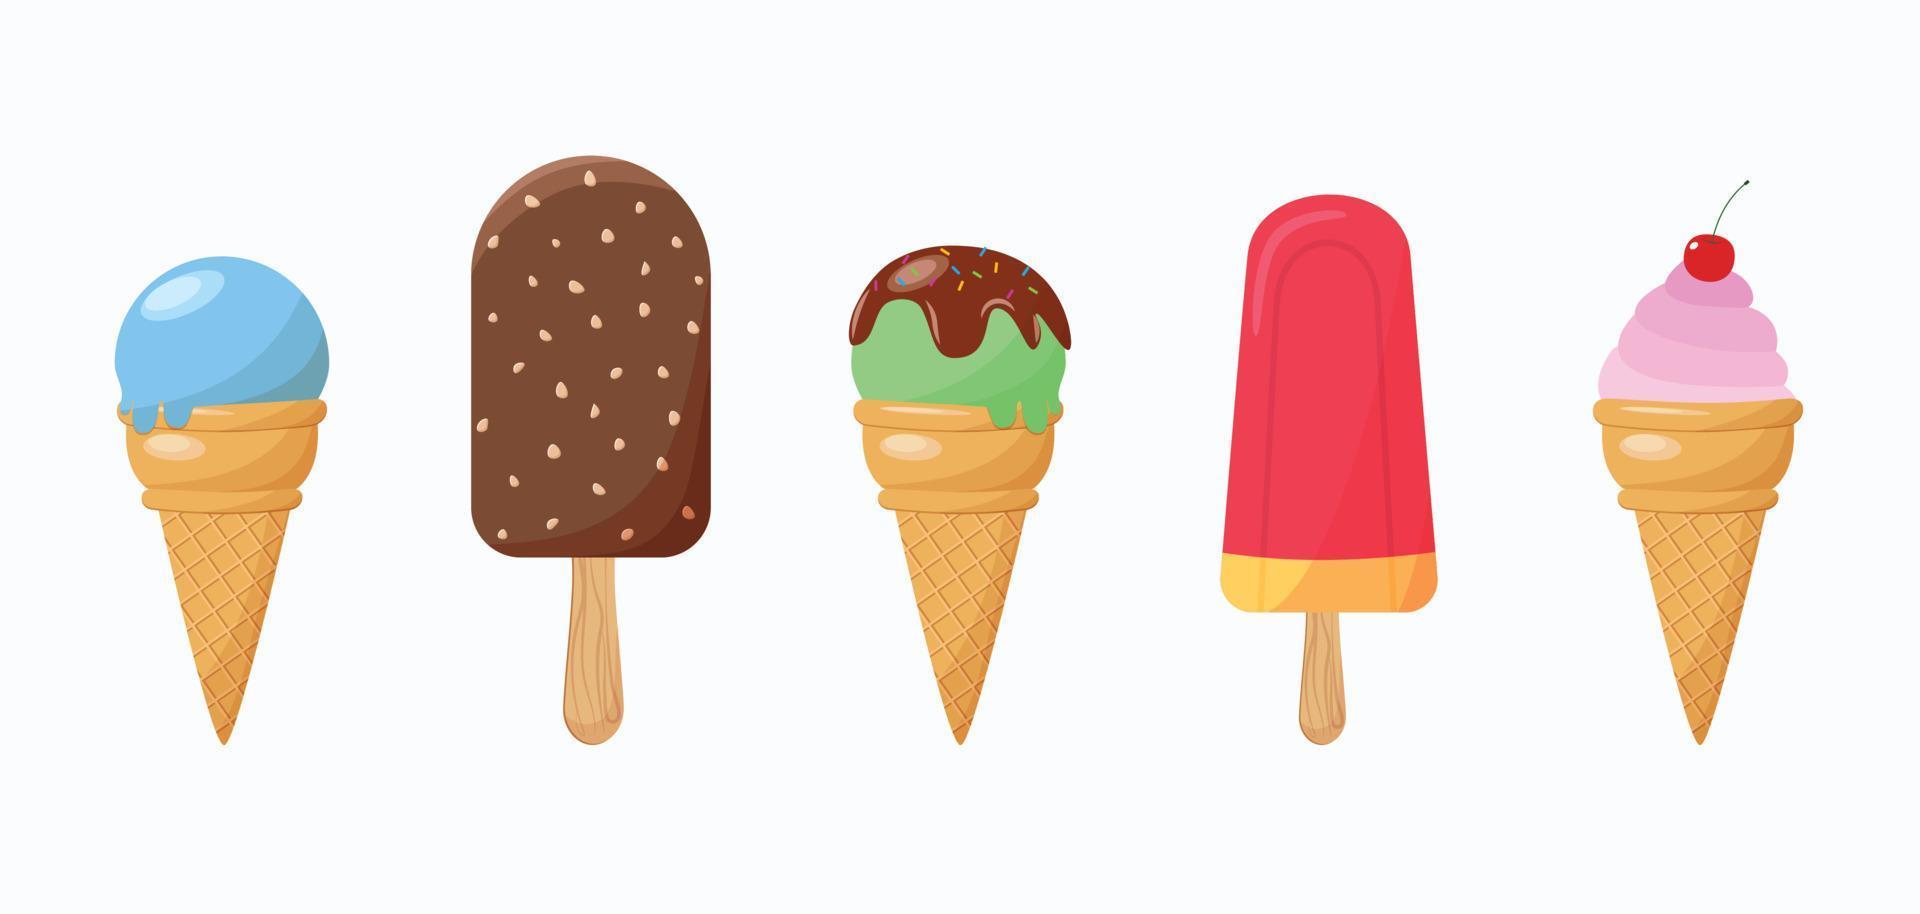 Delicious colorful ice cream set. Collectible ice cream and popsicle cones with different toppings isolated on white background. Vector illustration for web design or print